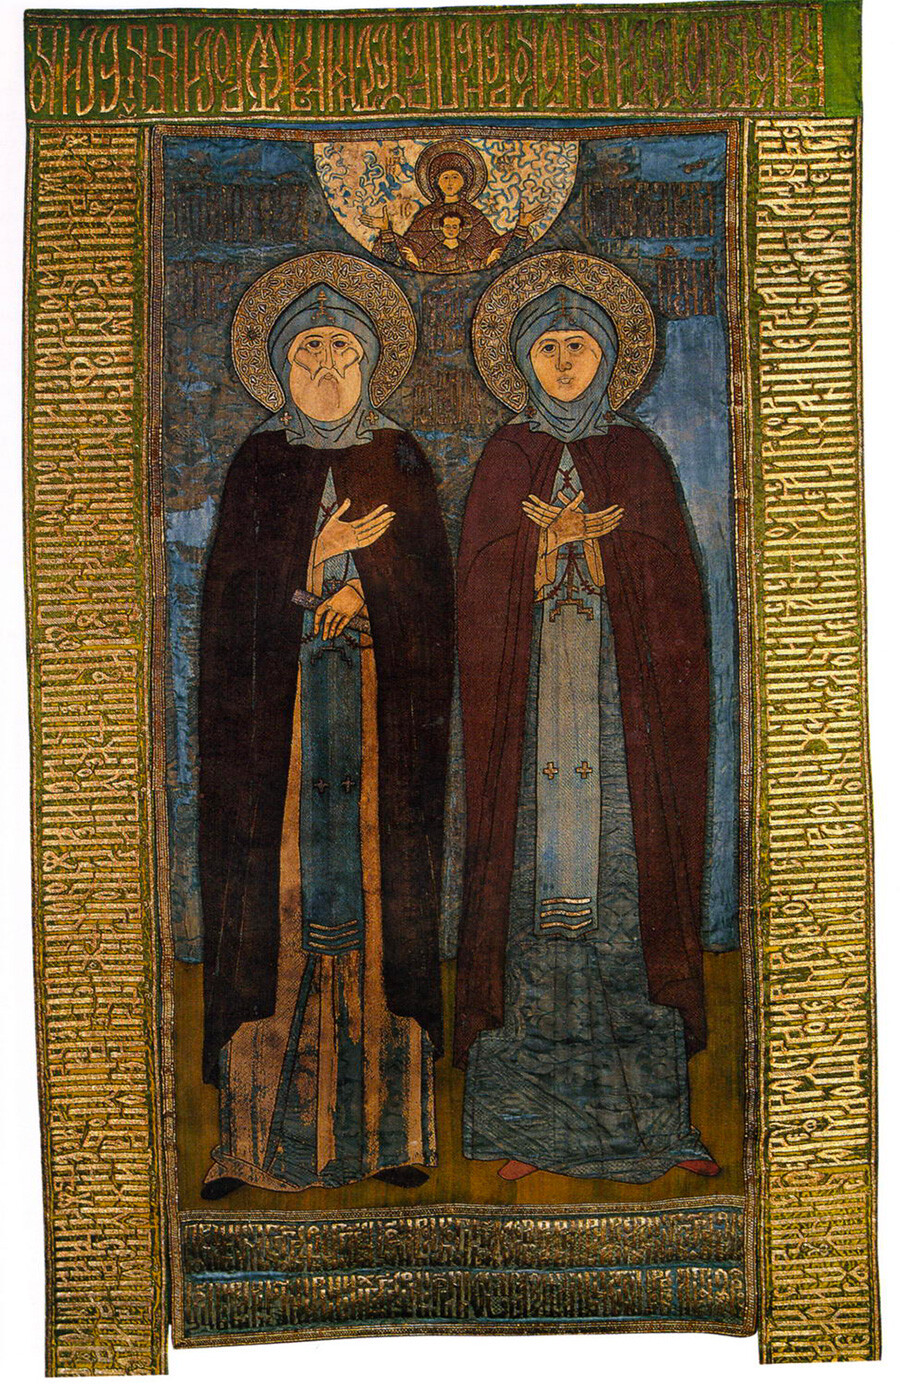 Cover for the shrine of Peter and Fevronia. A contribution to the Nativity Cathedral in Murom by Tsar Fedor and Tsarina Irina, 1593